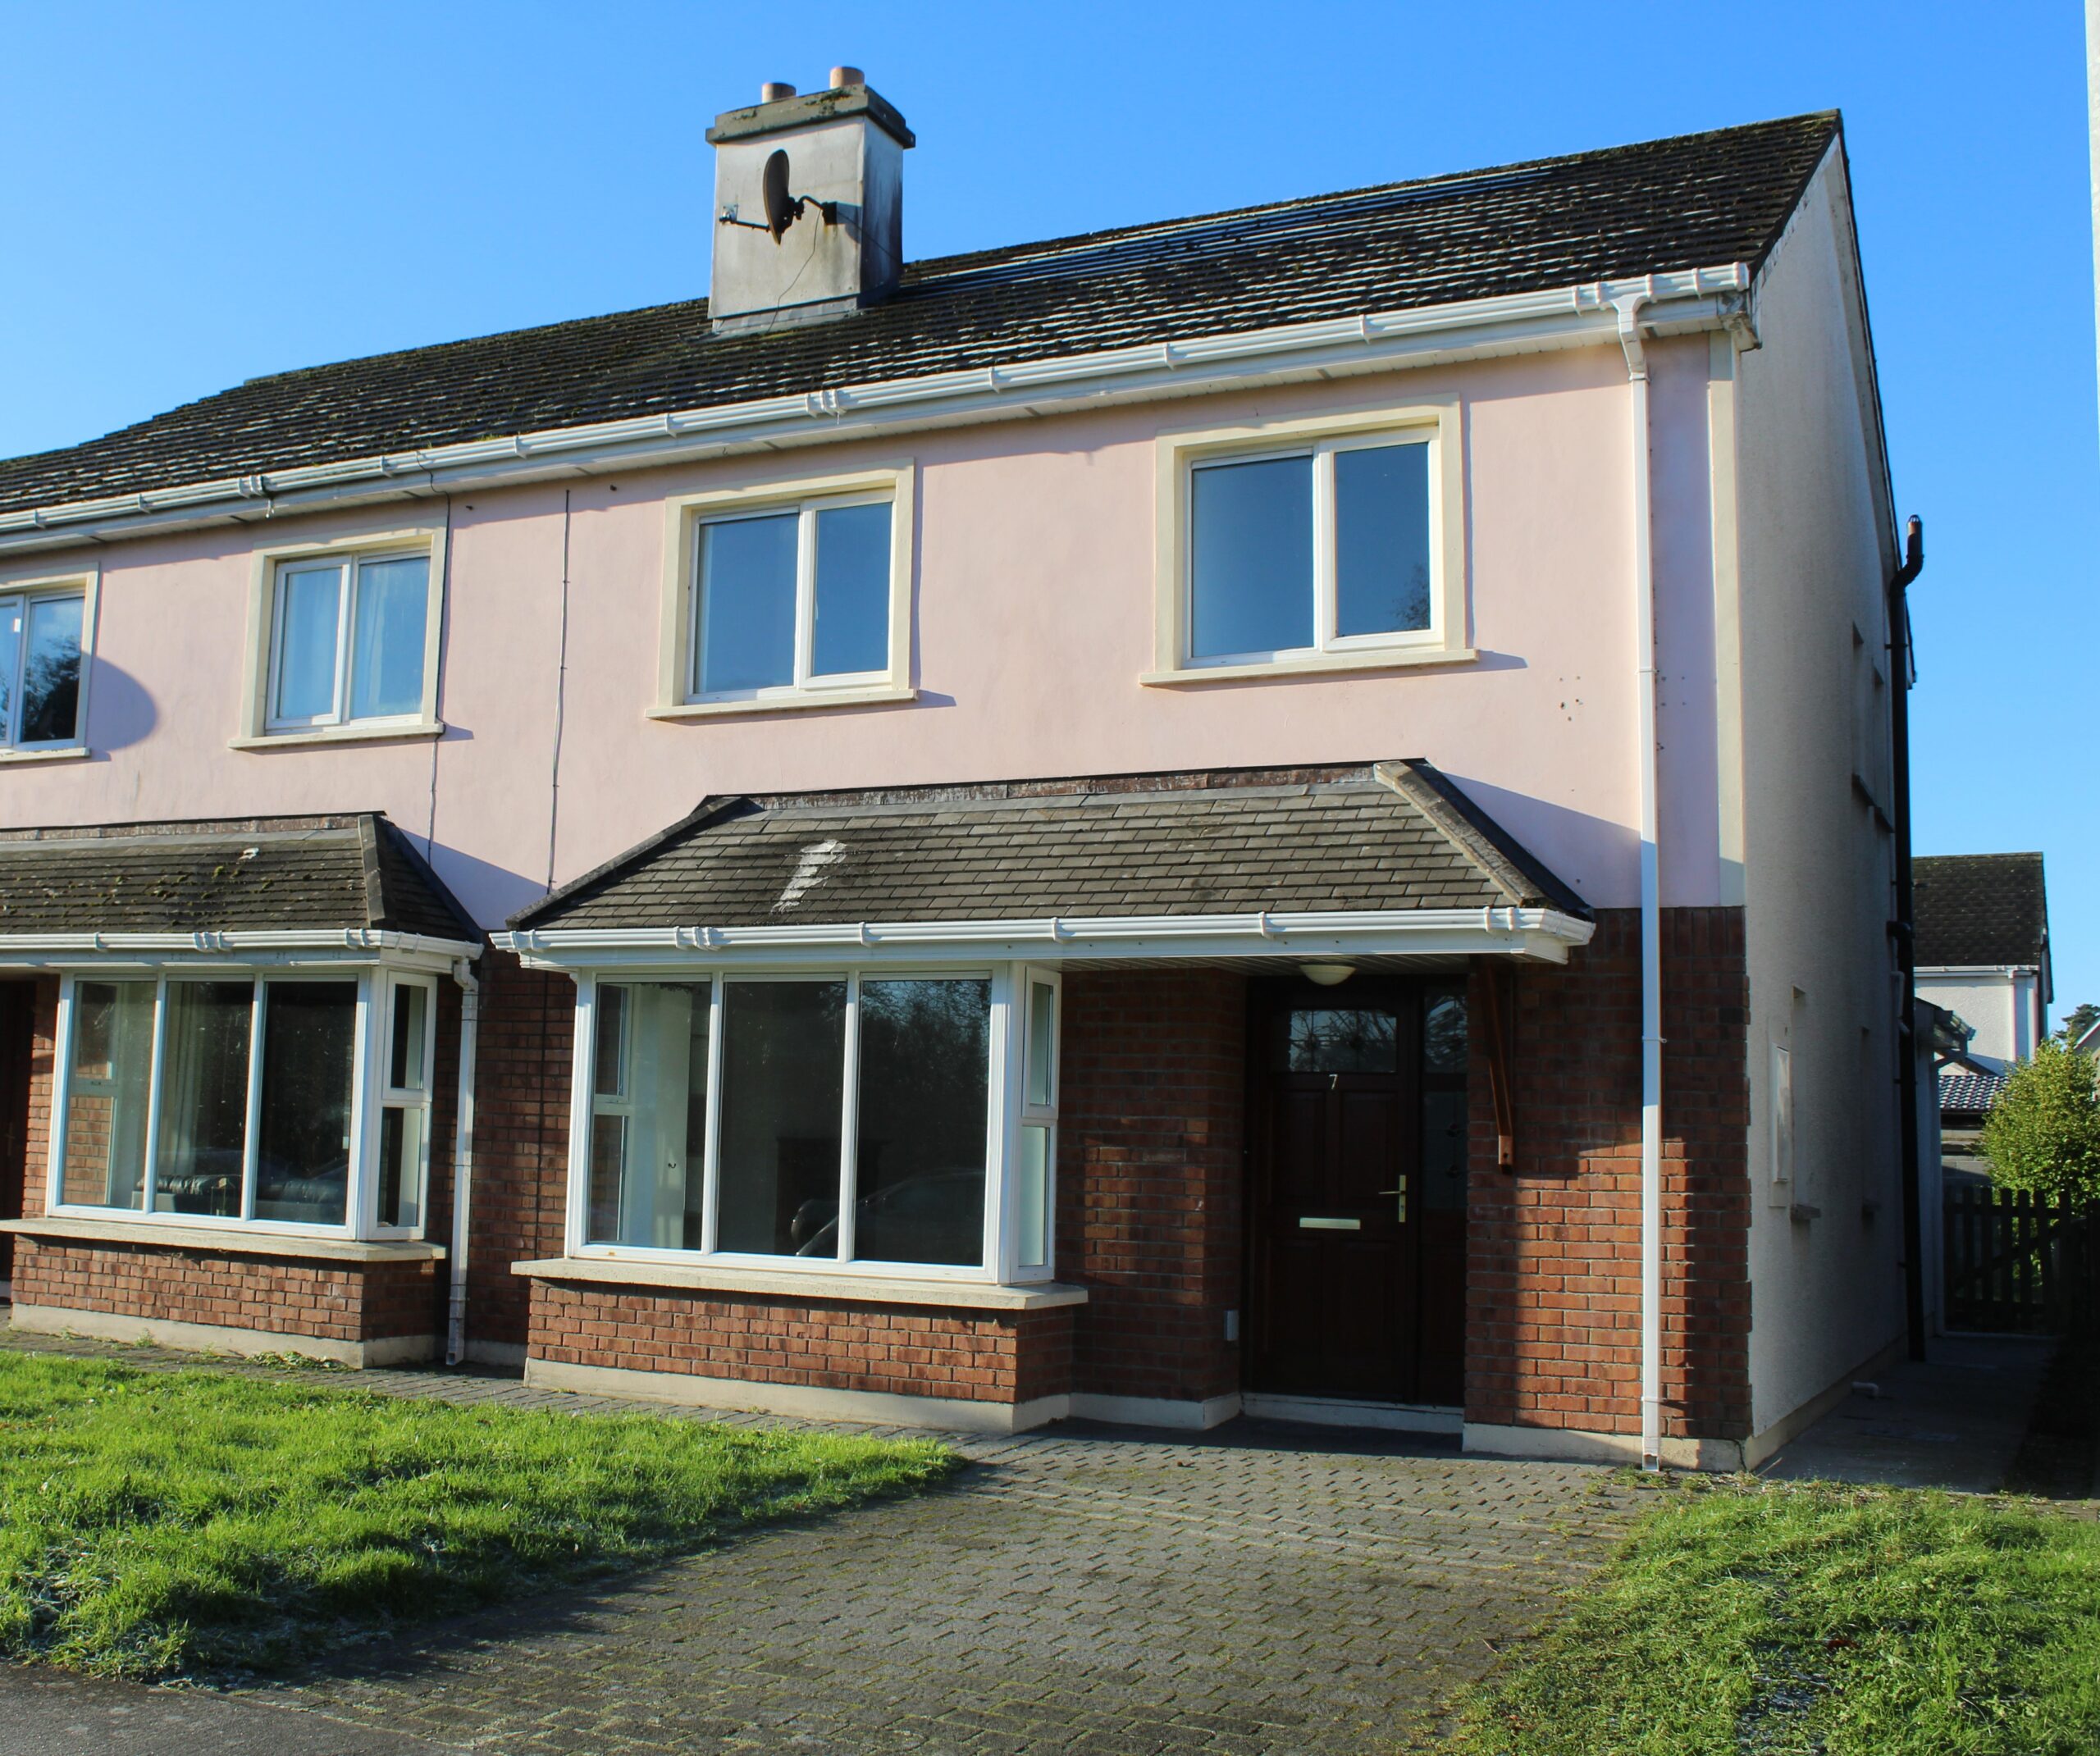 7 Cois Abhann, Caherweesheen, Tralee, Co. Kerry